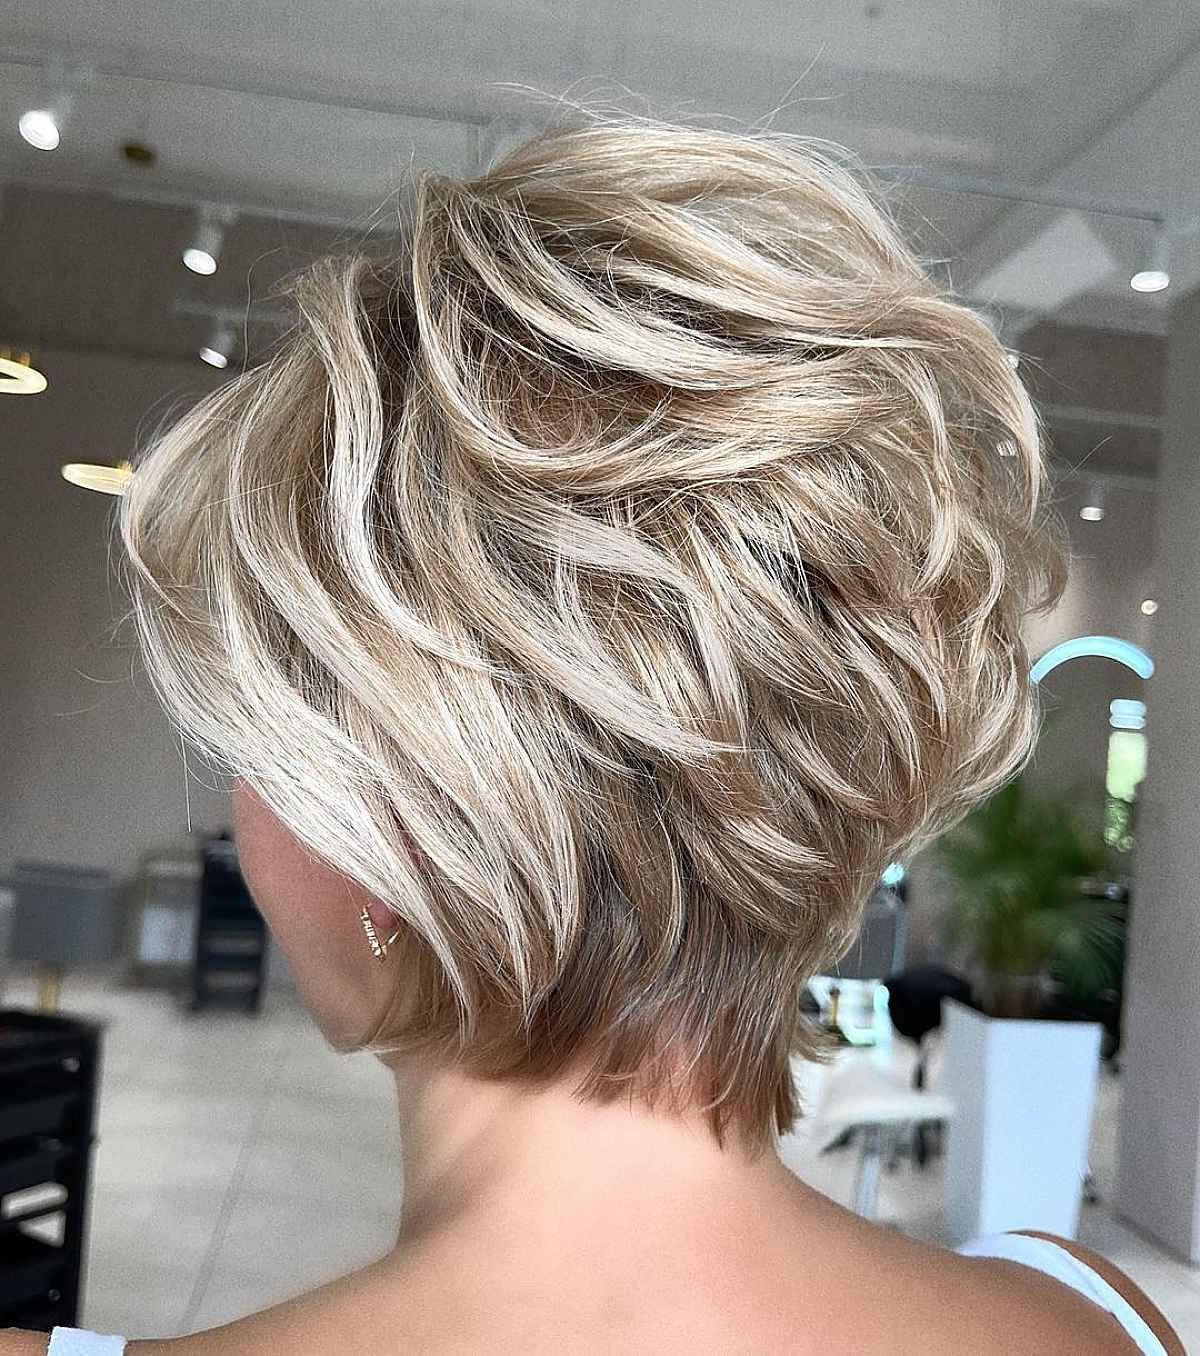 31 Chic Layered Long Pixie Cut Ideas You Can Totally Pull Off Throughout Layered Long Pixie Hairstyles (View 2 of 25)